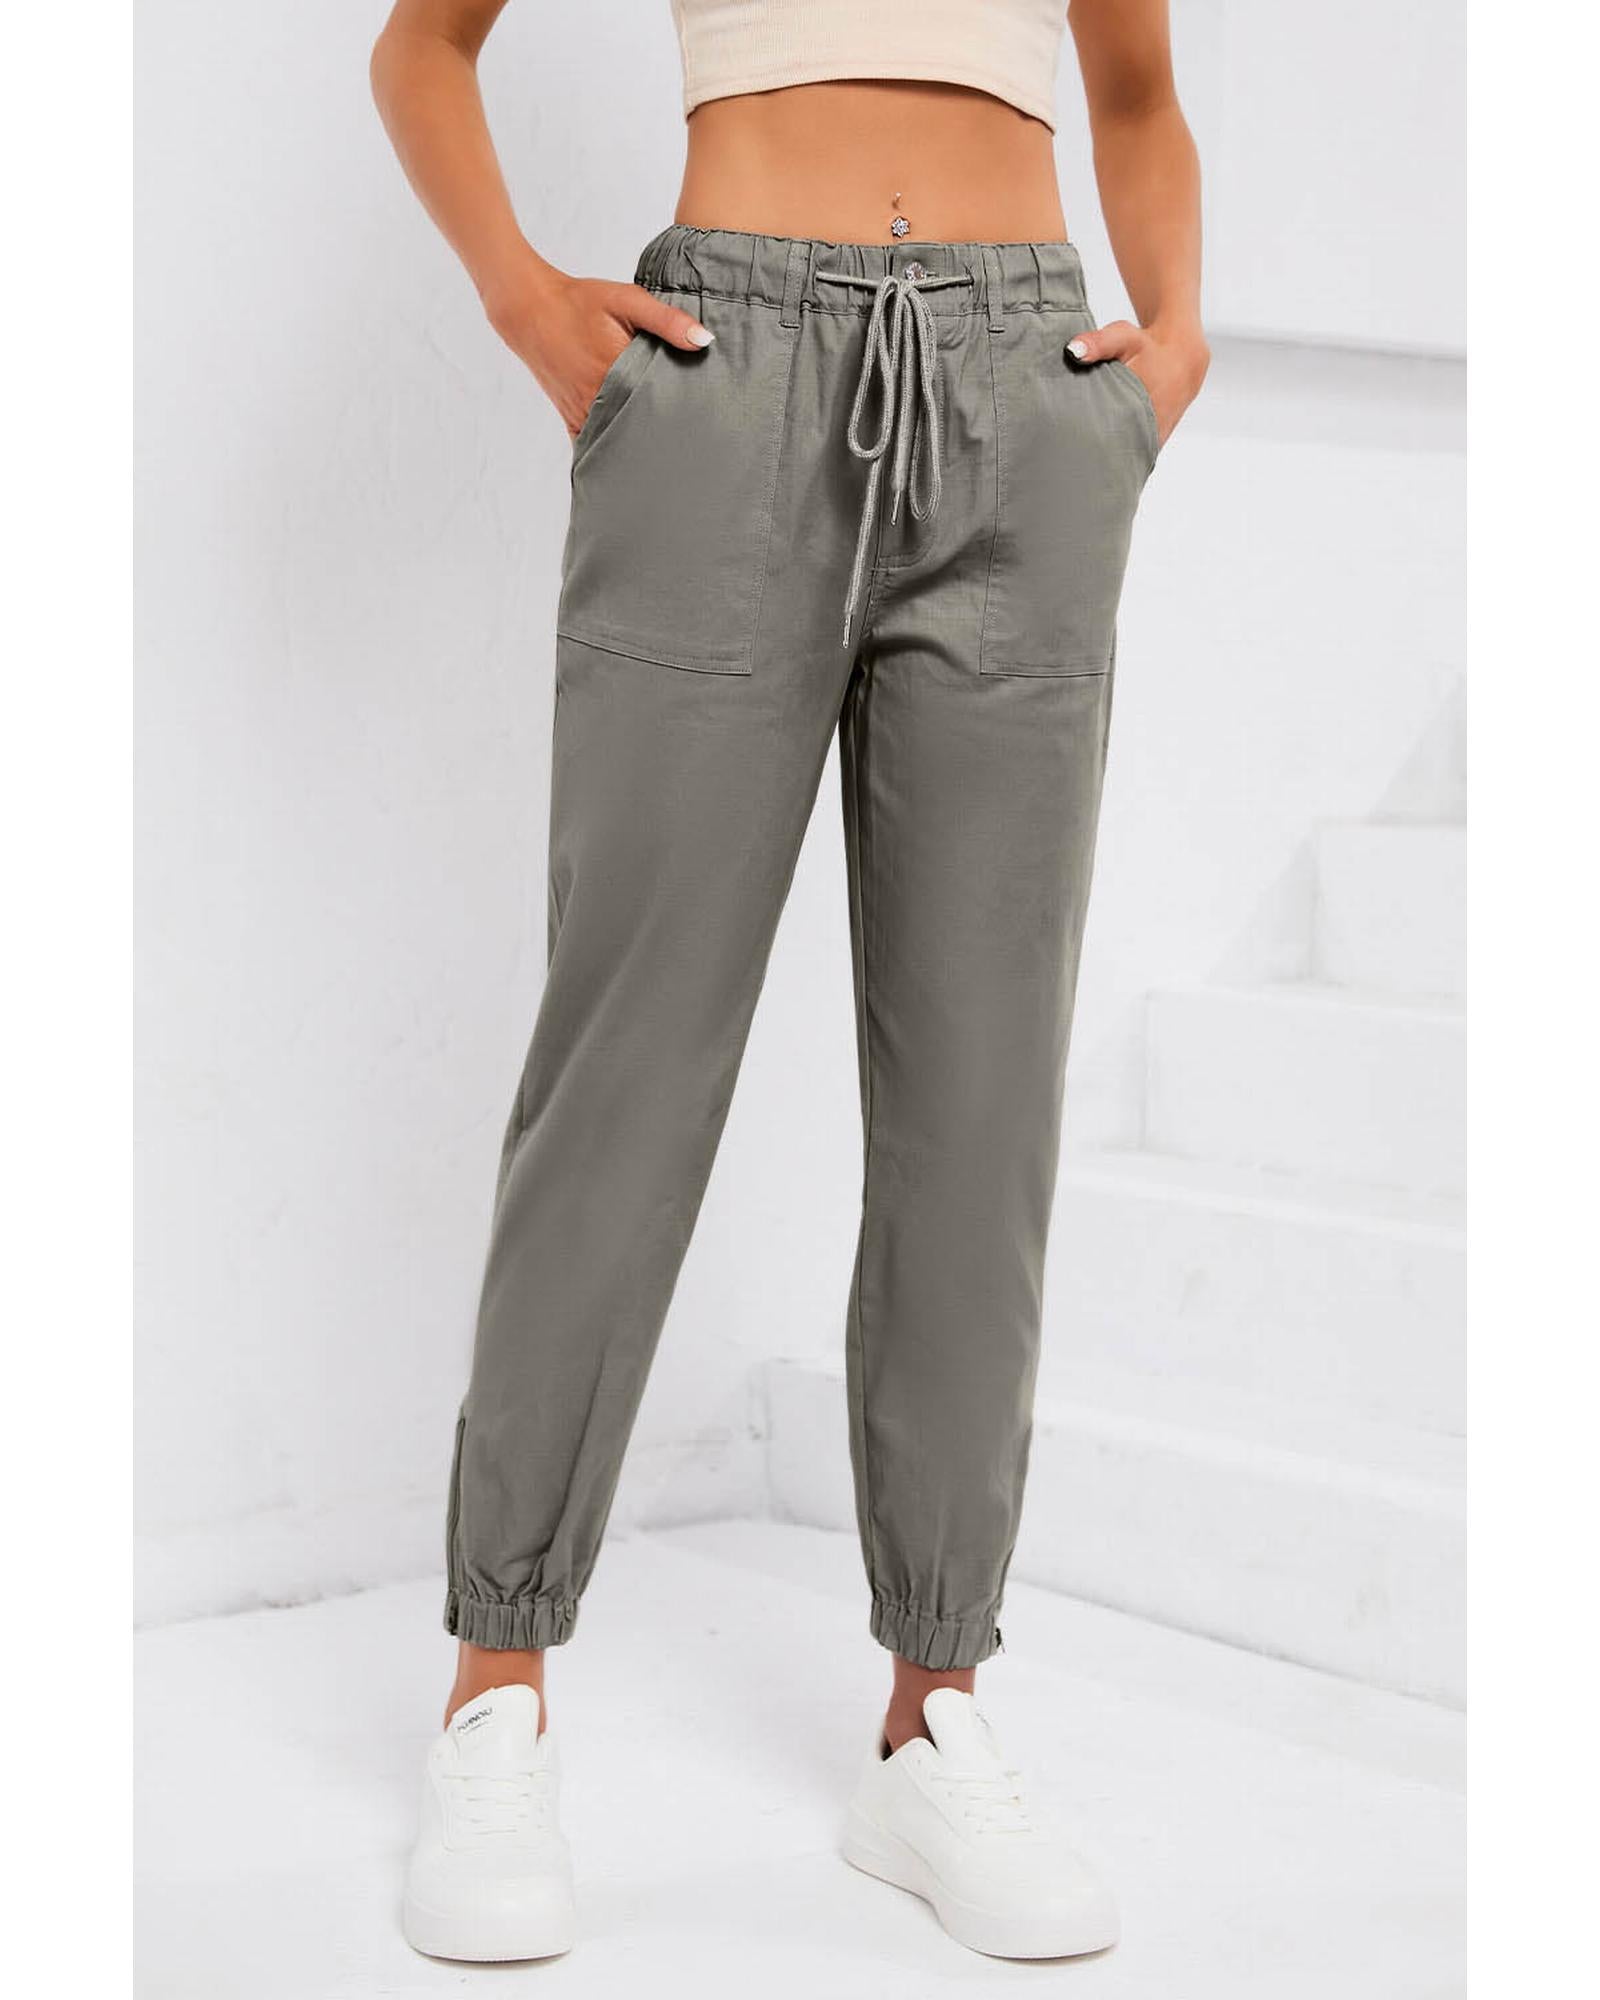 Pocketed Twill Jogger Pants - S